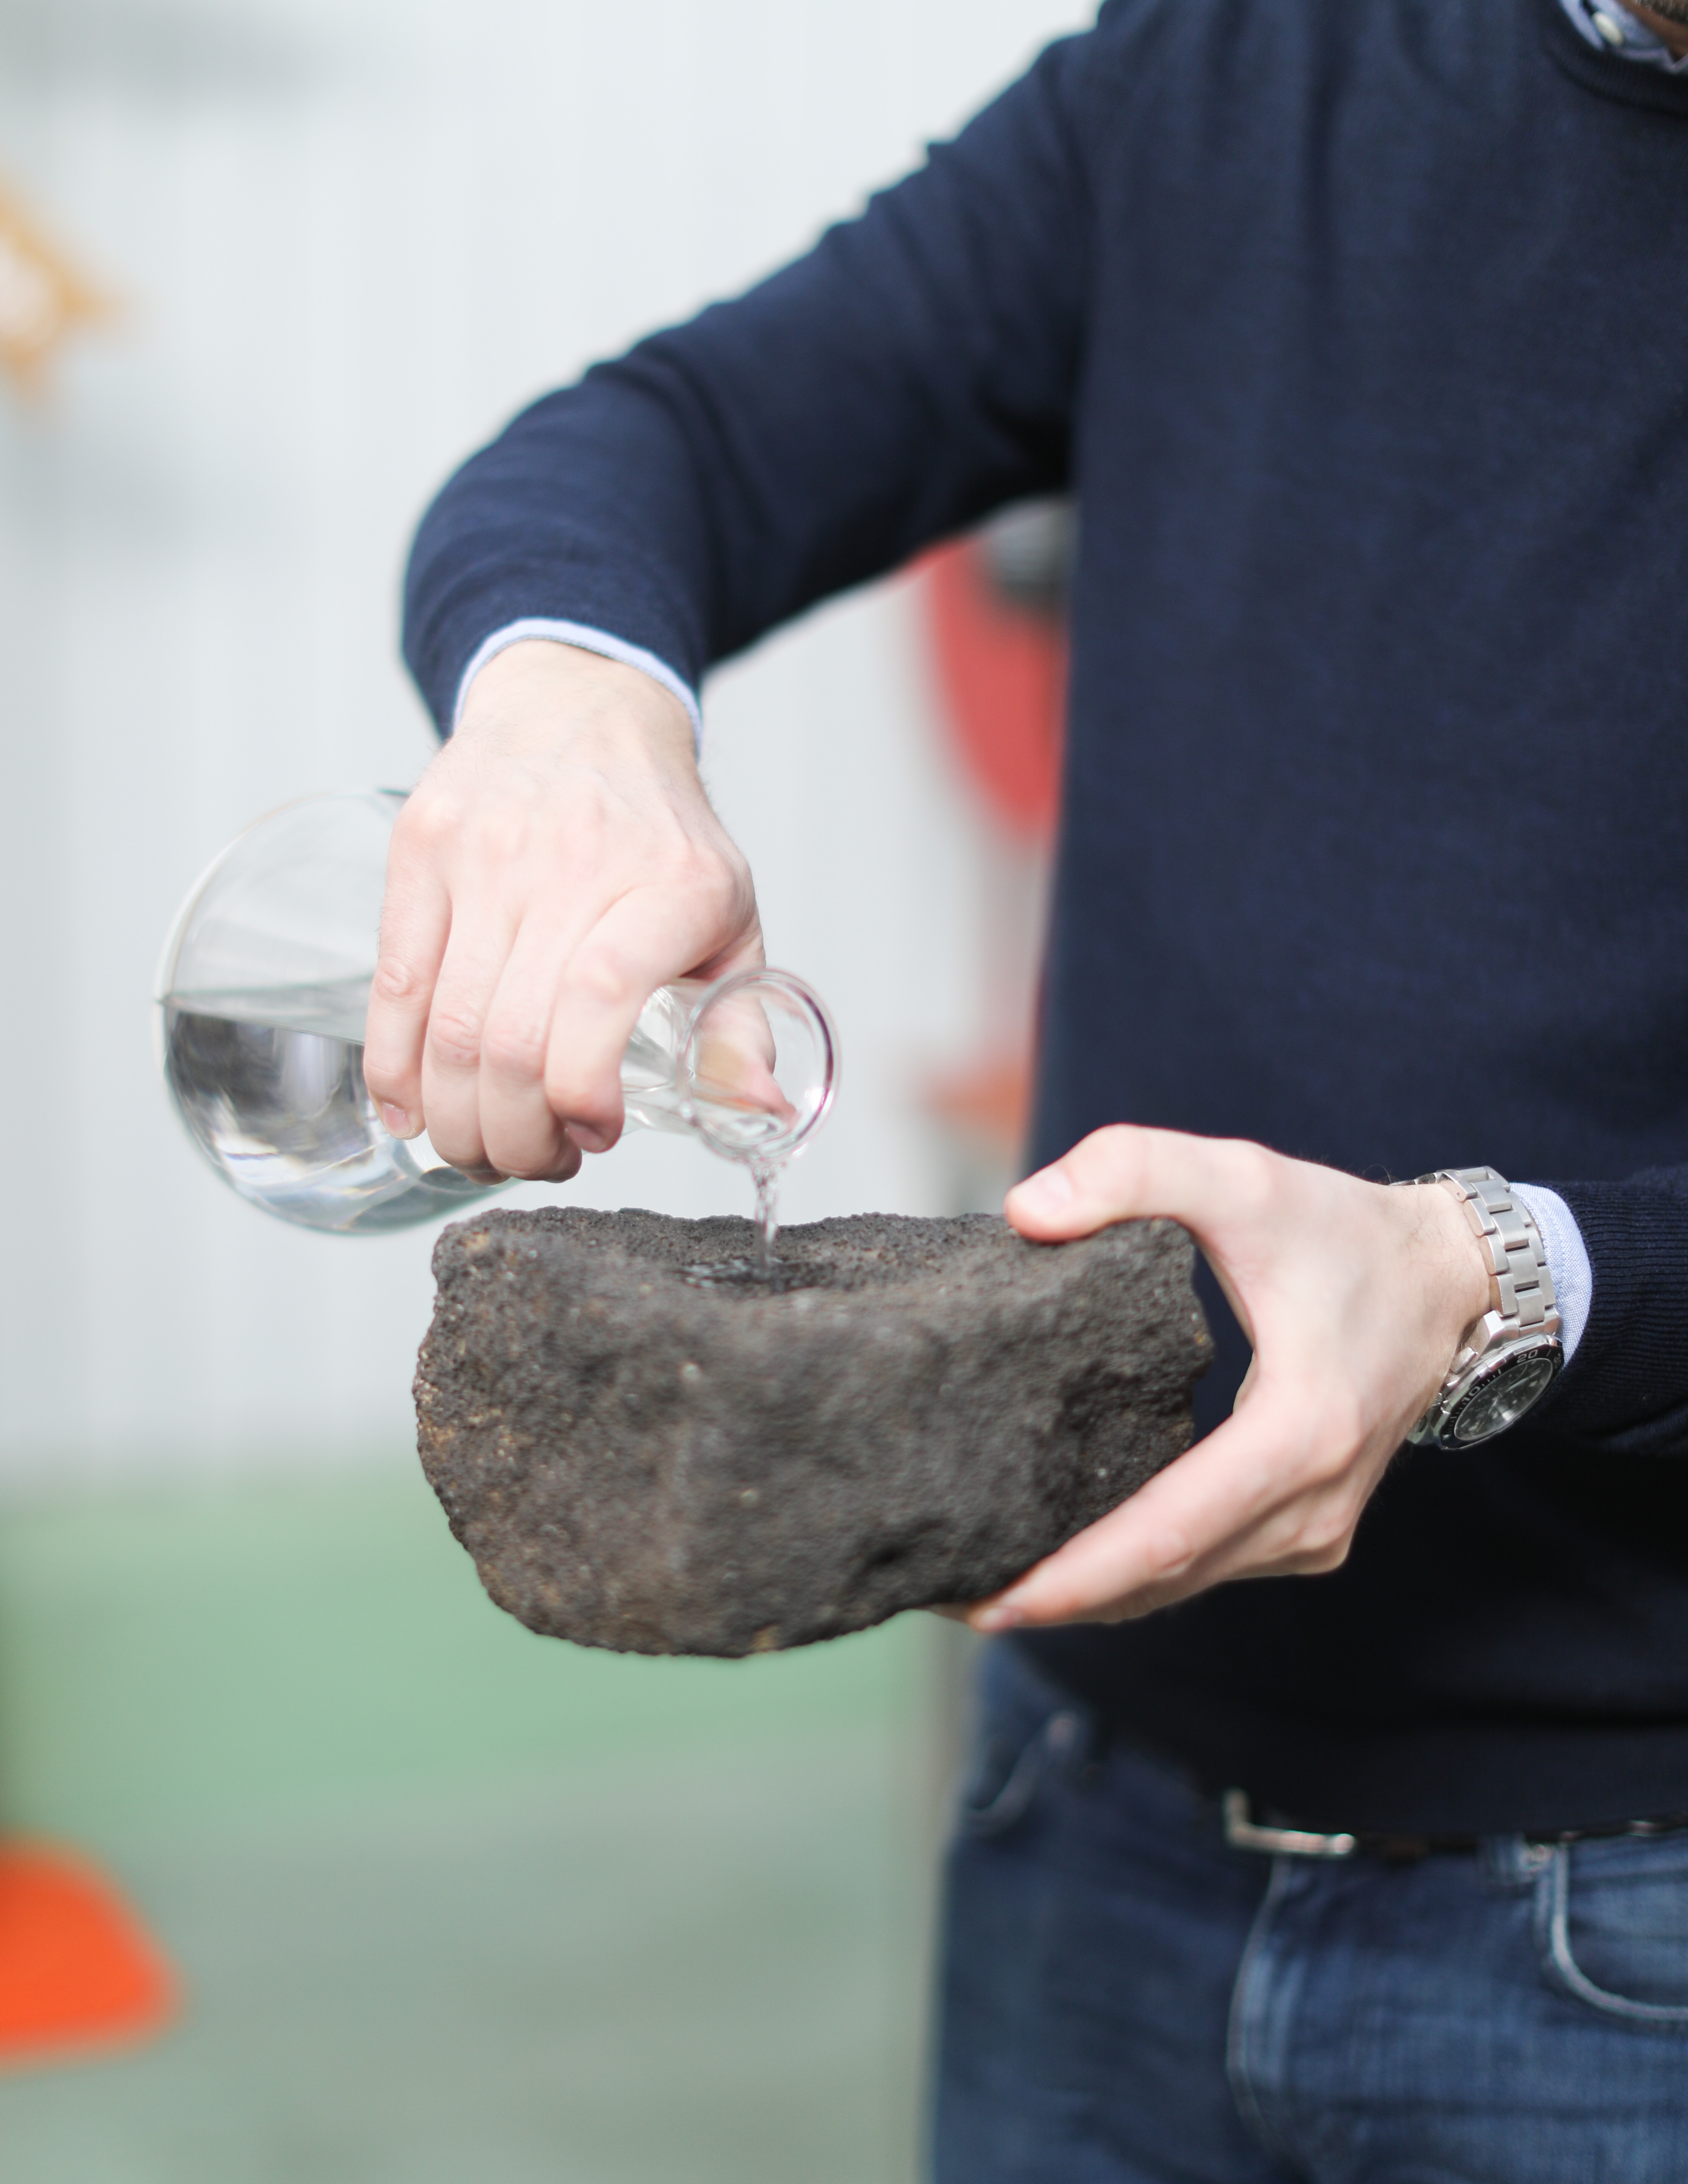 Distiller pours vodka into a piece of charcoal to demonstrate pure distillation process.